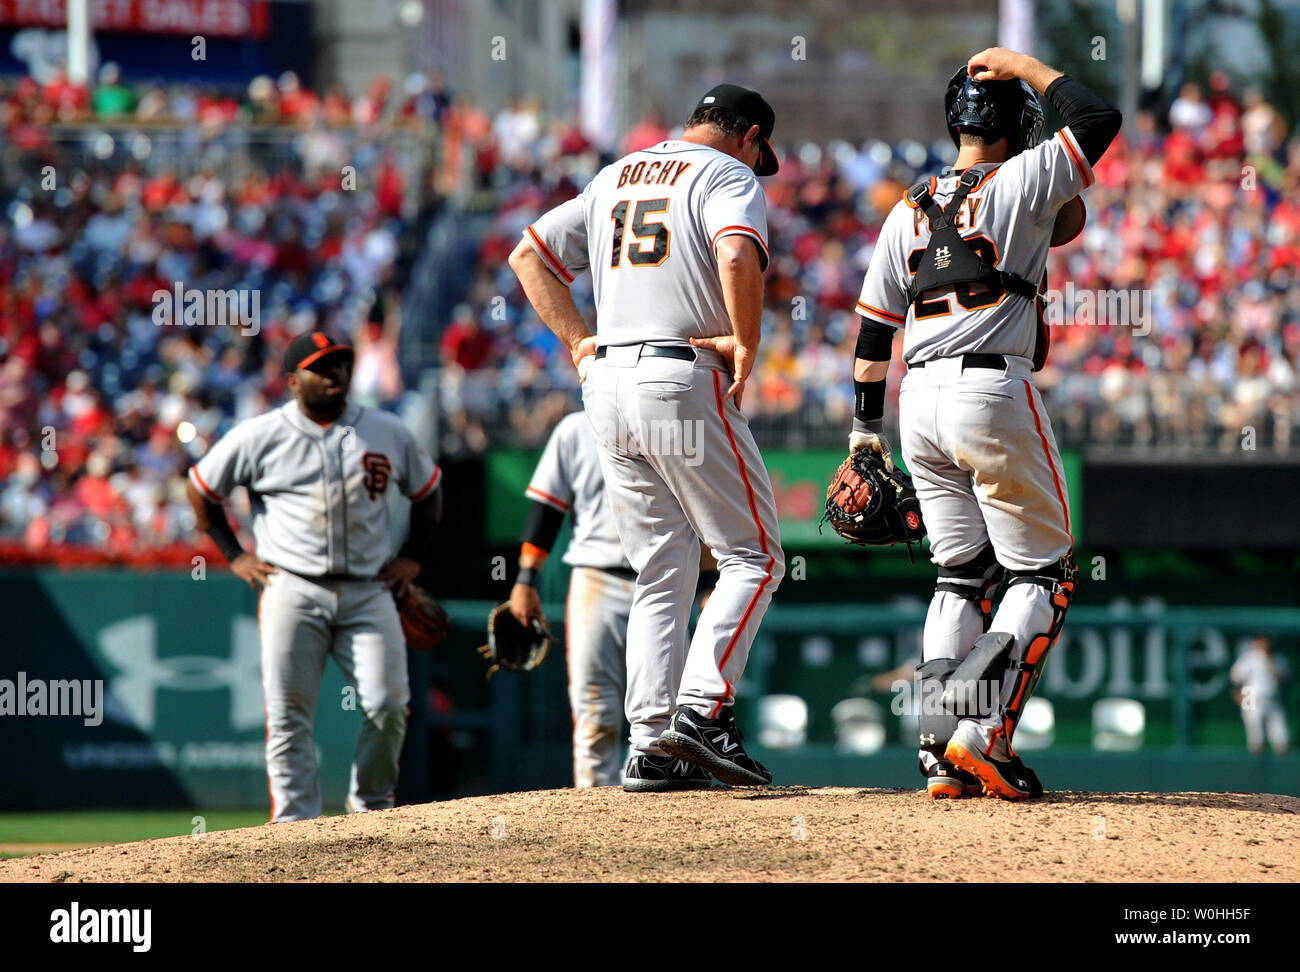 San Francisco Giants manager Bruce Bochy waits on the mound with catcher Buster Posey after reliving pitcher Javier Lopez, at Nationals Park in on August 24, 2014 in Washington, D.C. UPI/Kevin Dietsch Stock Photo